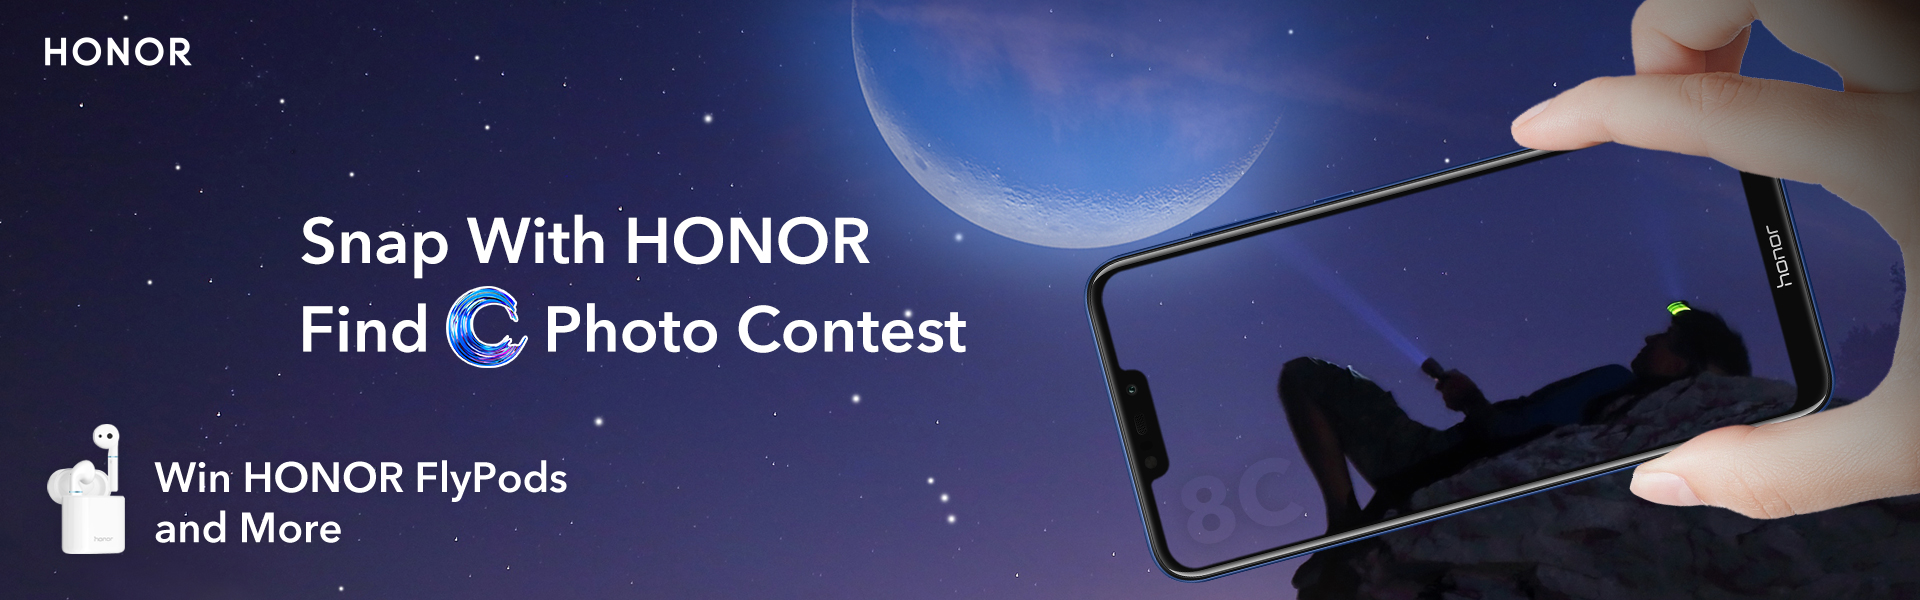 Winner-Announcement-Find-C-in-Your-Life-to-Win-HONOR-Flypods-and-More